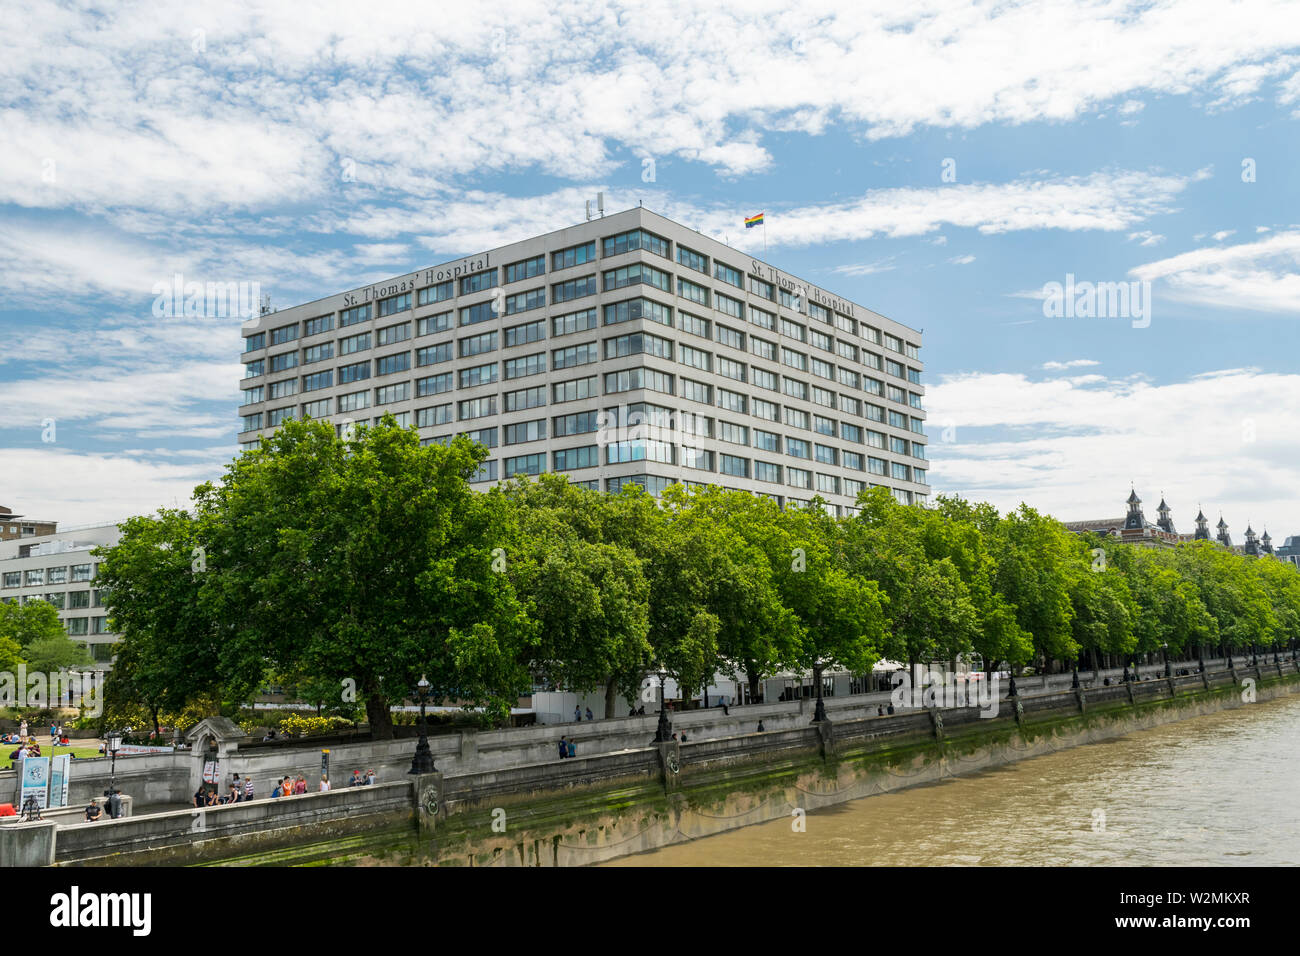 London's St Thomas' Hospital situated on the banks of the River Thames and is a large NHS teaching hospital. taken from Westminster Bridge, London. Stock Photo